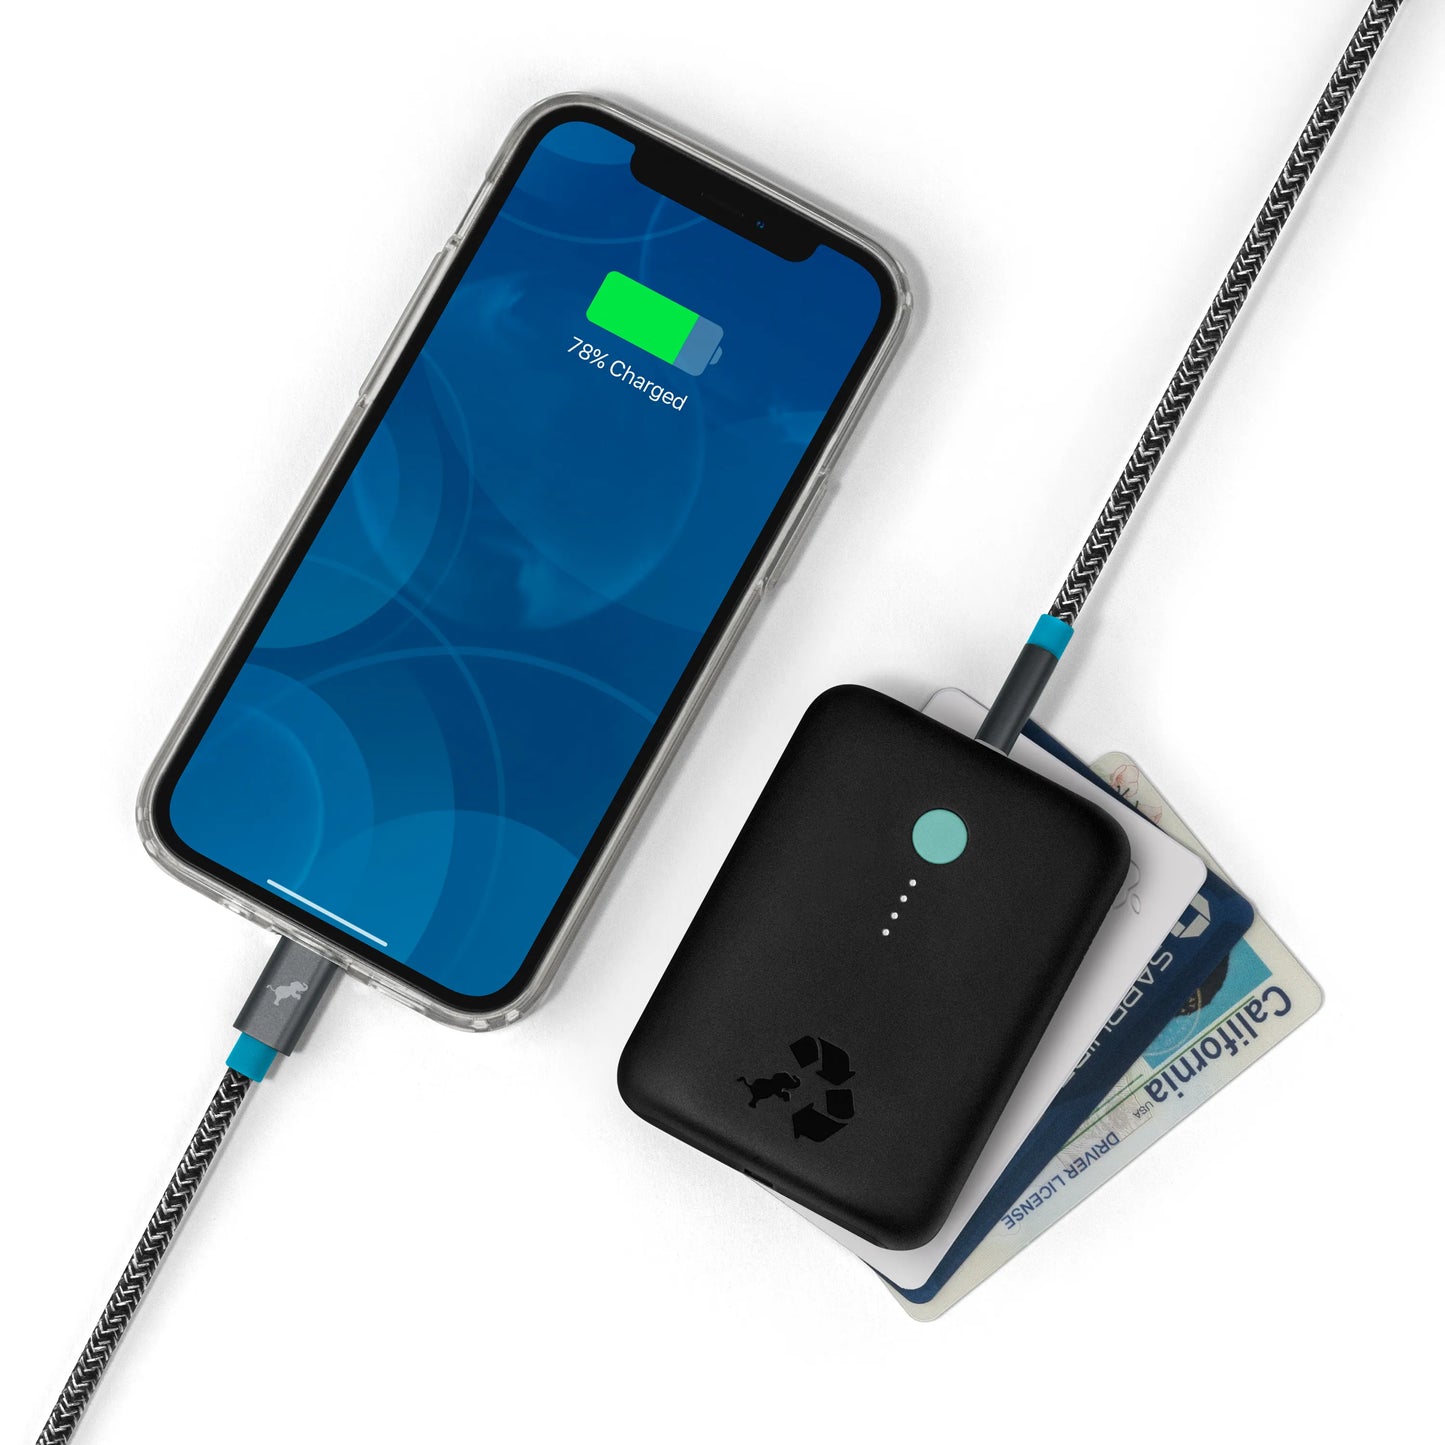 Black portable charger with green button connected to cell phone.